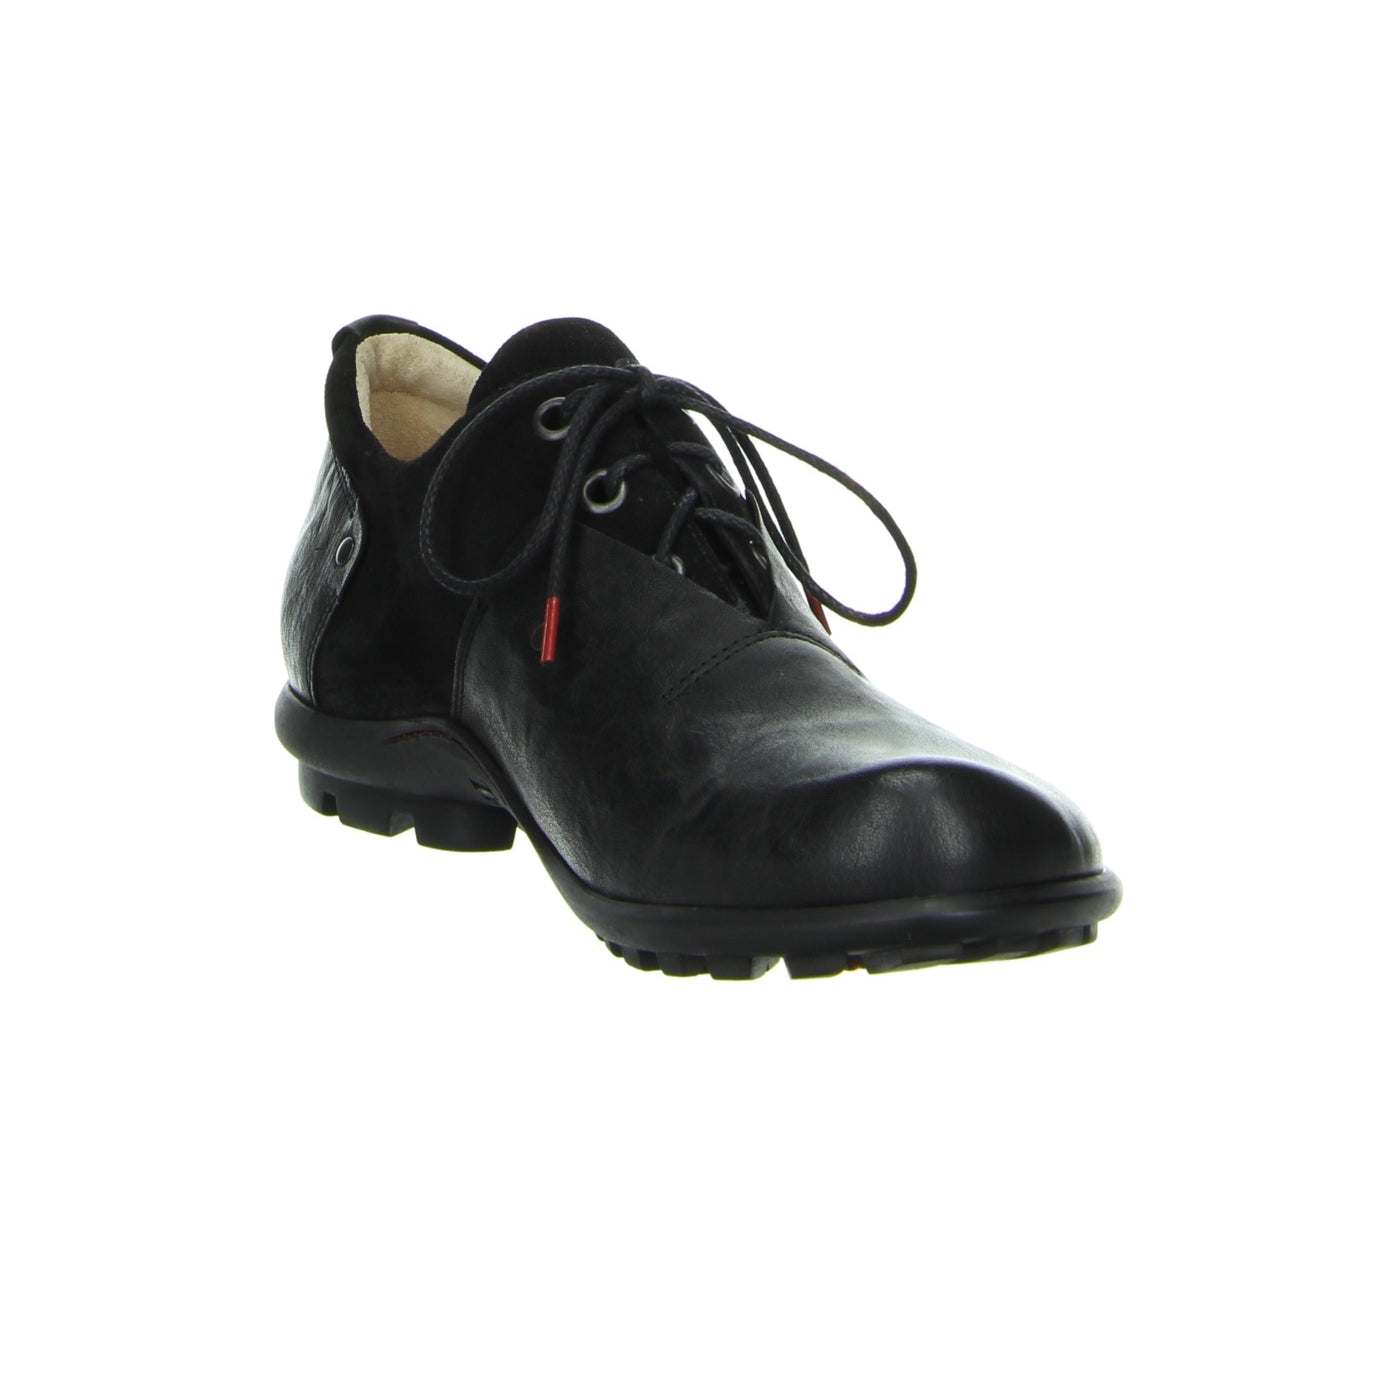 Think Shoes USA KONG Lace Up Shoes - Black 88651-09